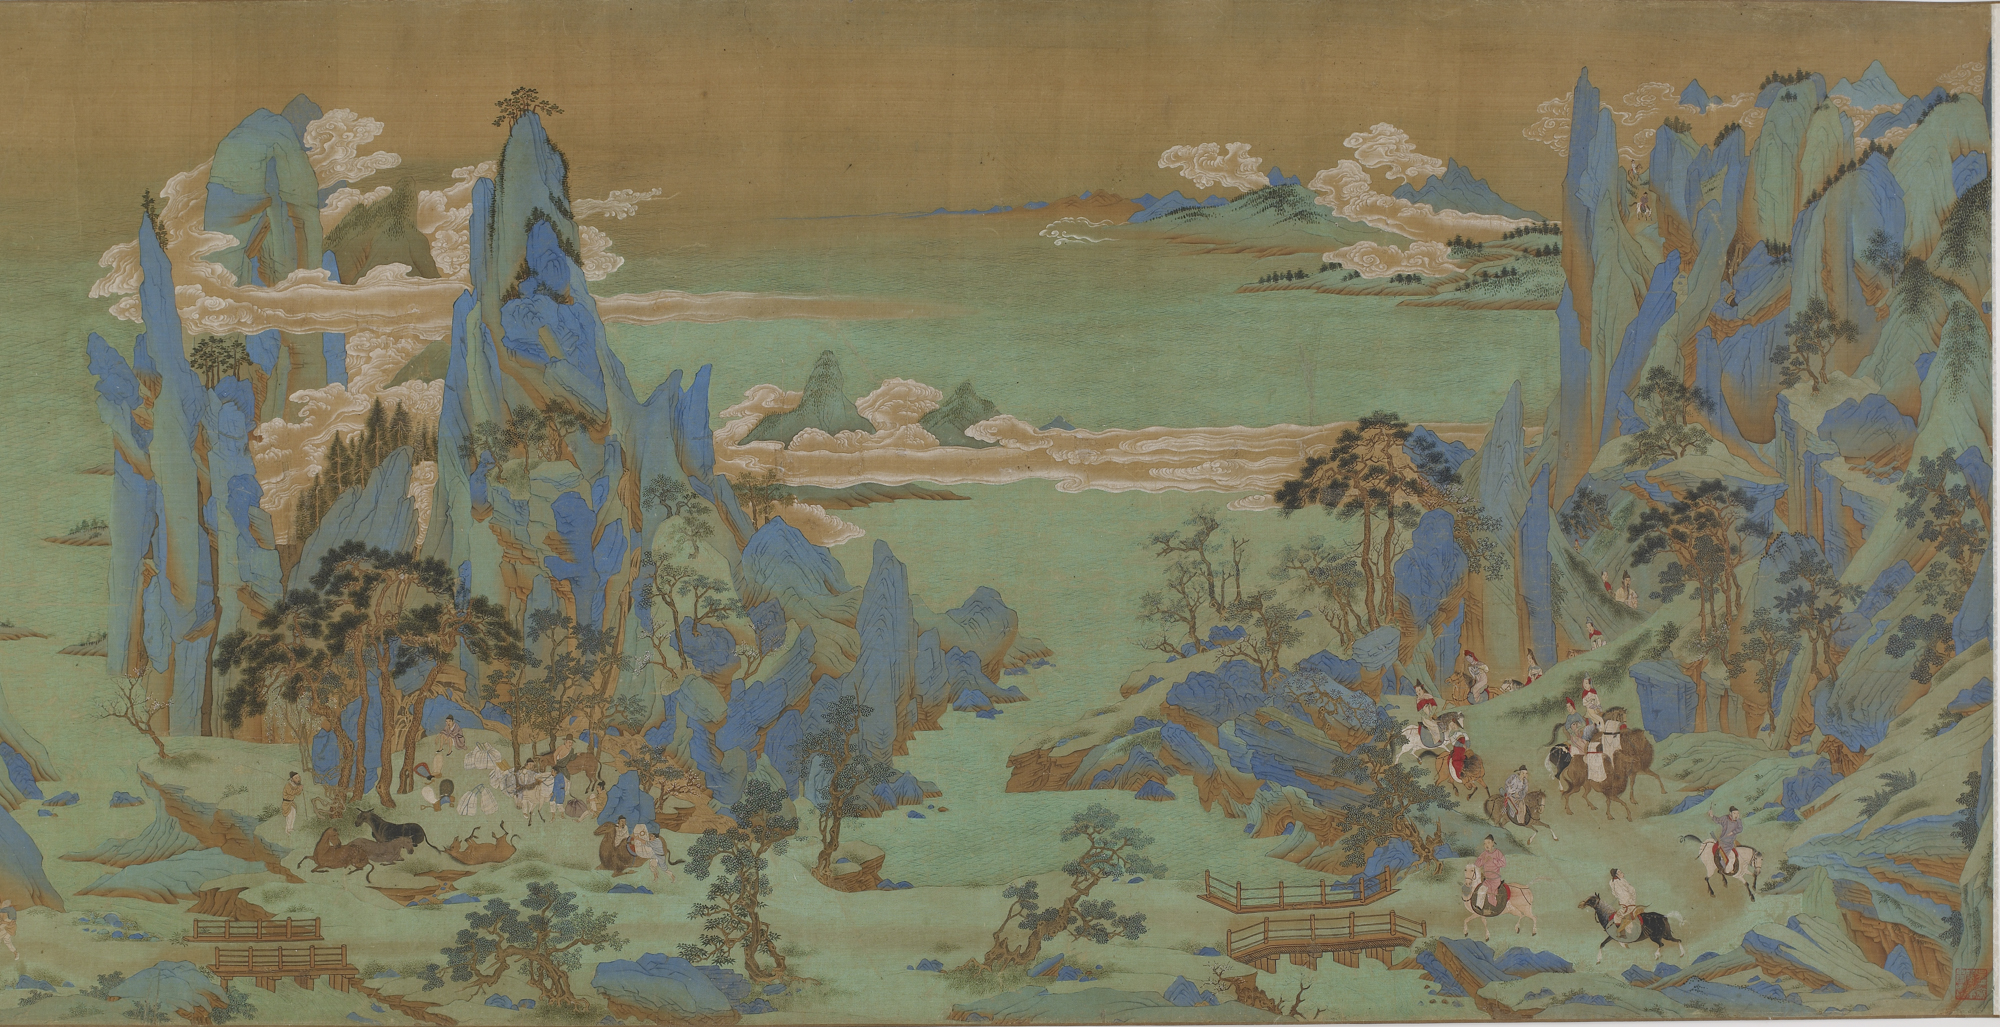 Ming dynasty (1368–1644) - Smithsonian's National Museum of Asian Art